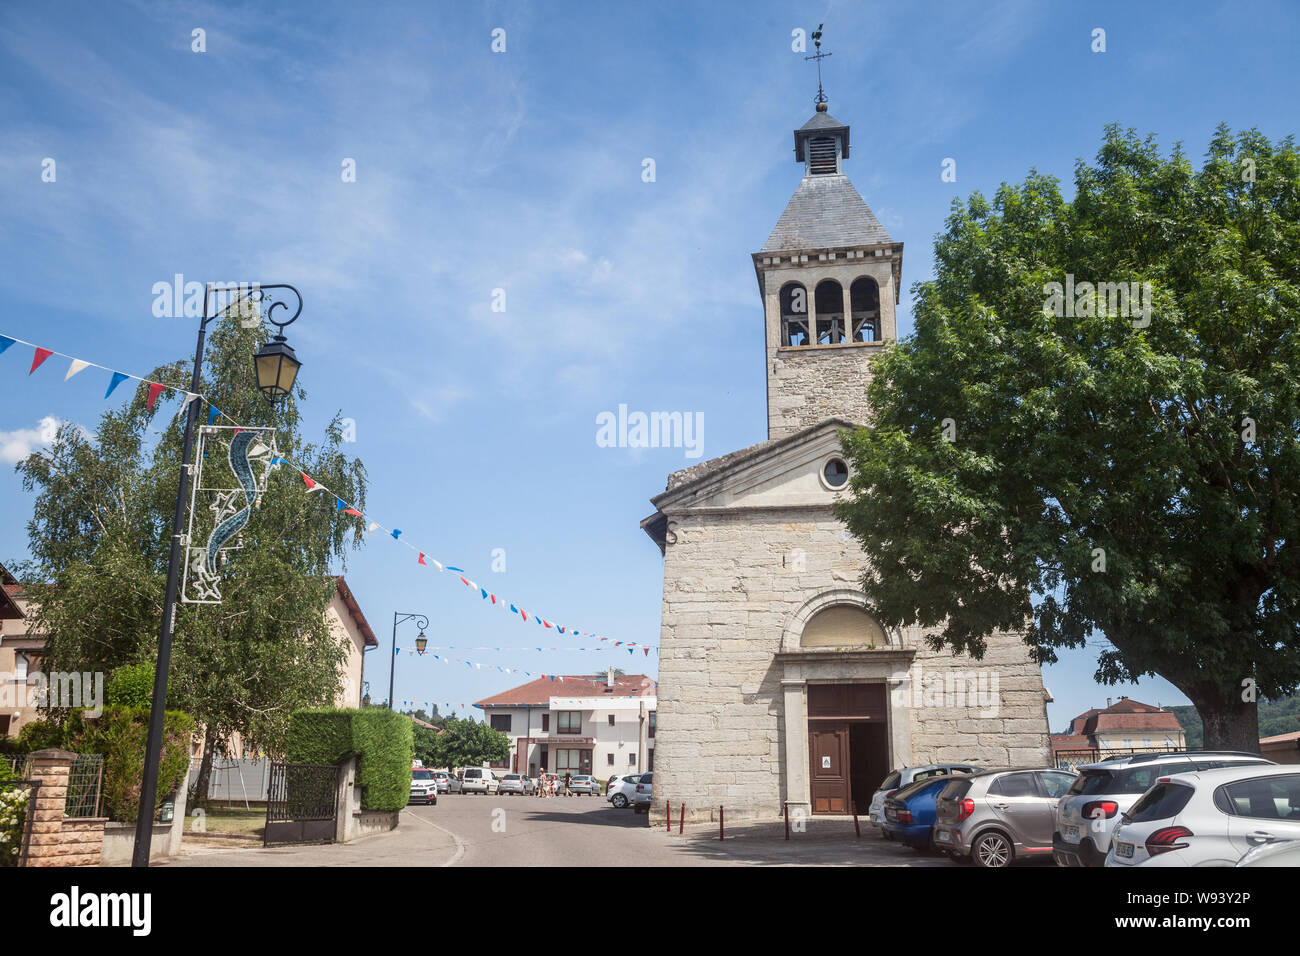 SAINT SAVIN, FRANCE - JULY 16, 2019: Catholic church in the center of Saint Savin, a typical French village of the countryside of Iseare, in the provi Stock Photo